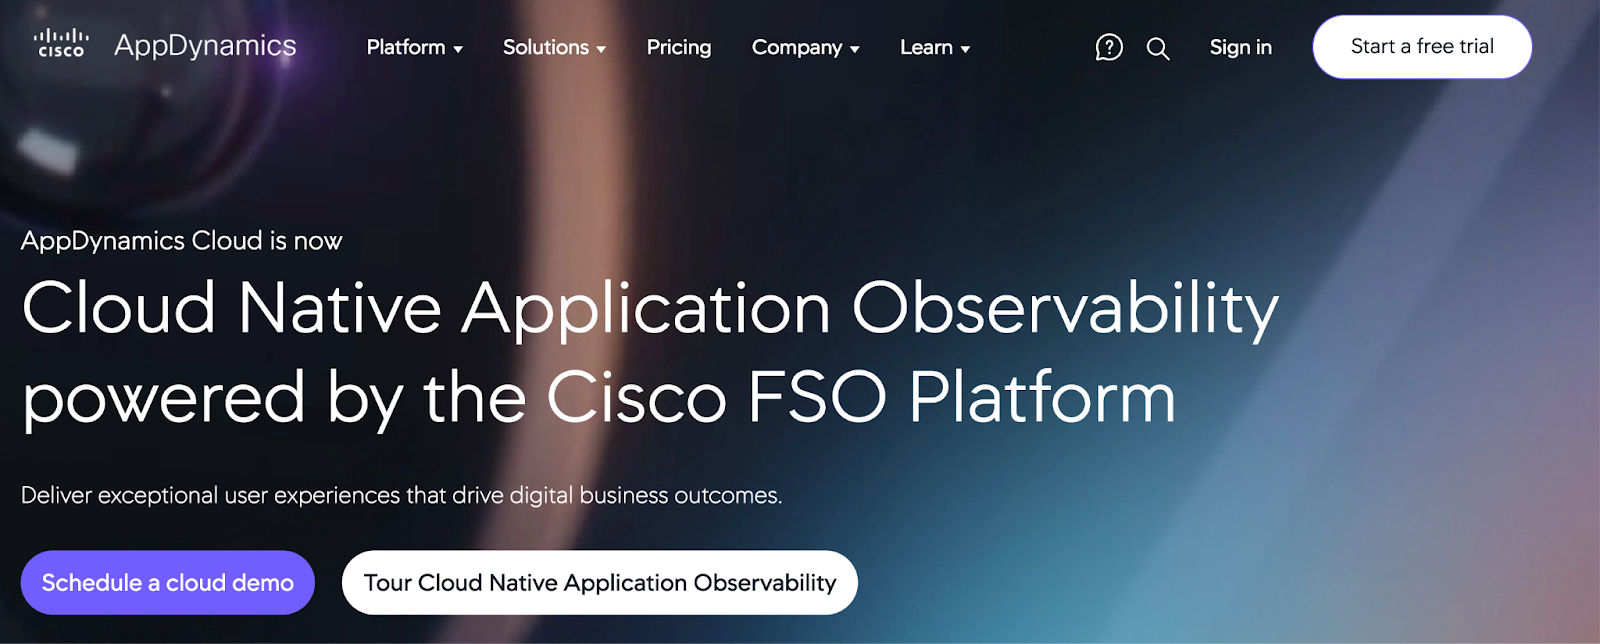 AppDynamics Cloud is renamed into Cloud Native Application Observability powered by the Cisco FSO Platform